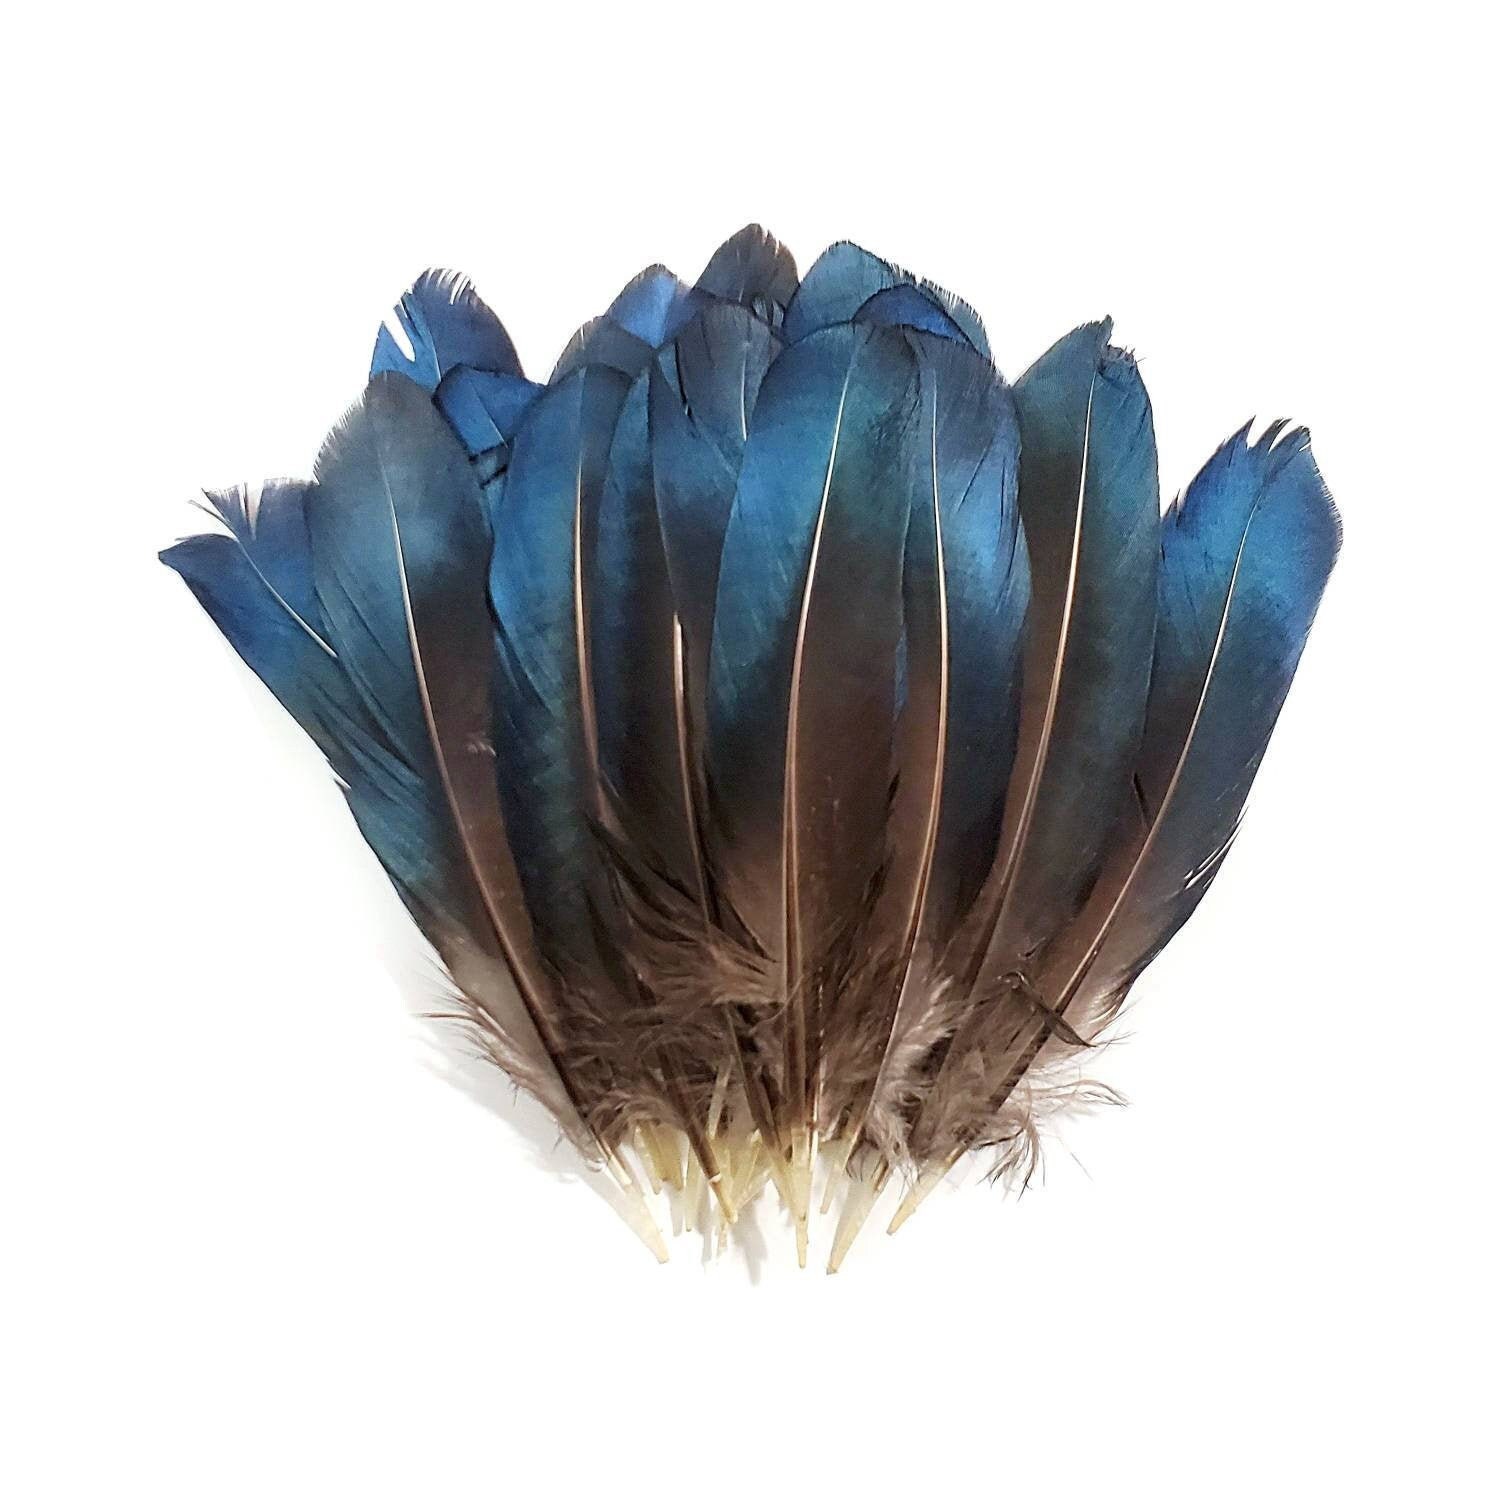 Turkey Feathers Trim Fringe Pheasant Feather Rooster Feather For Party  Wedding Dress Sewing Crafts Decoration - 5 Yards Turkey Feathers For Crafts,  Fe